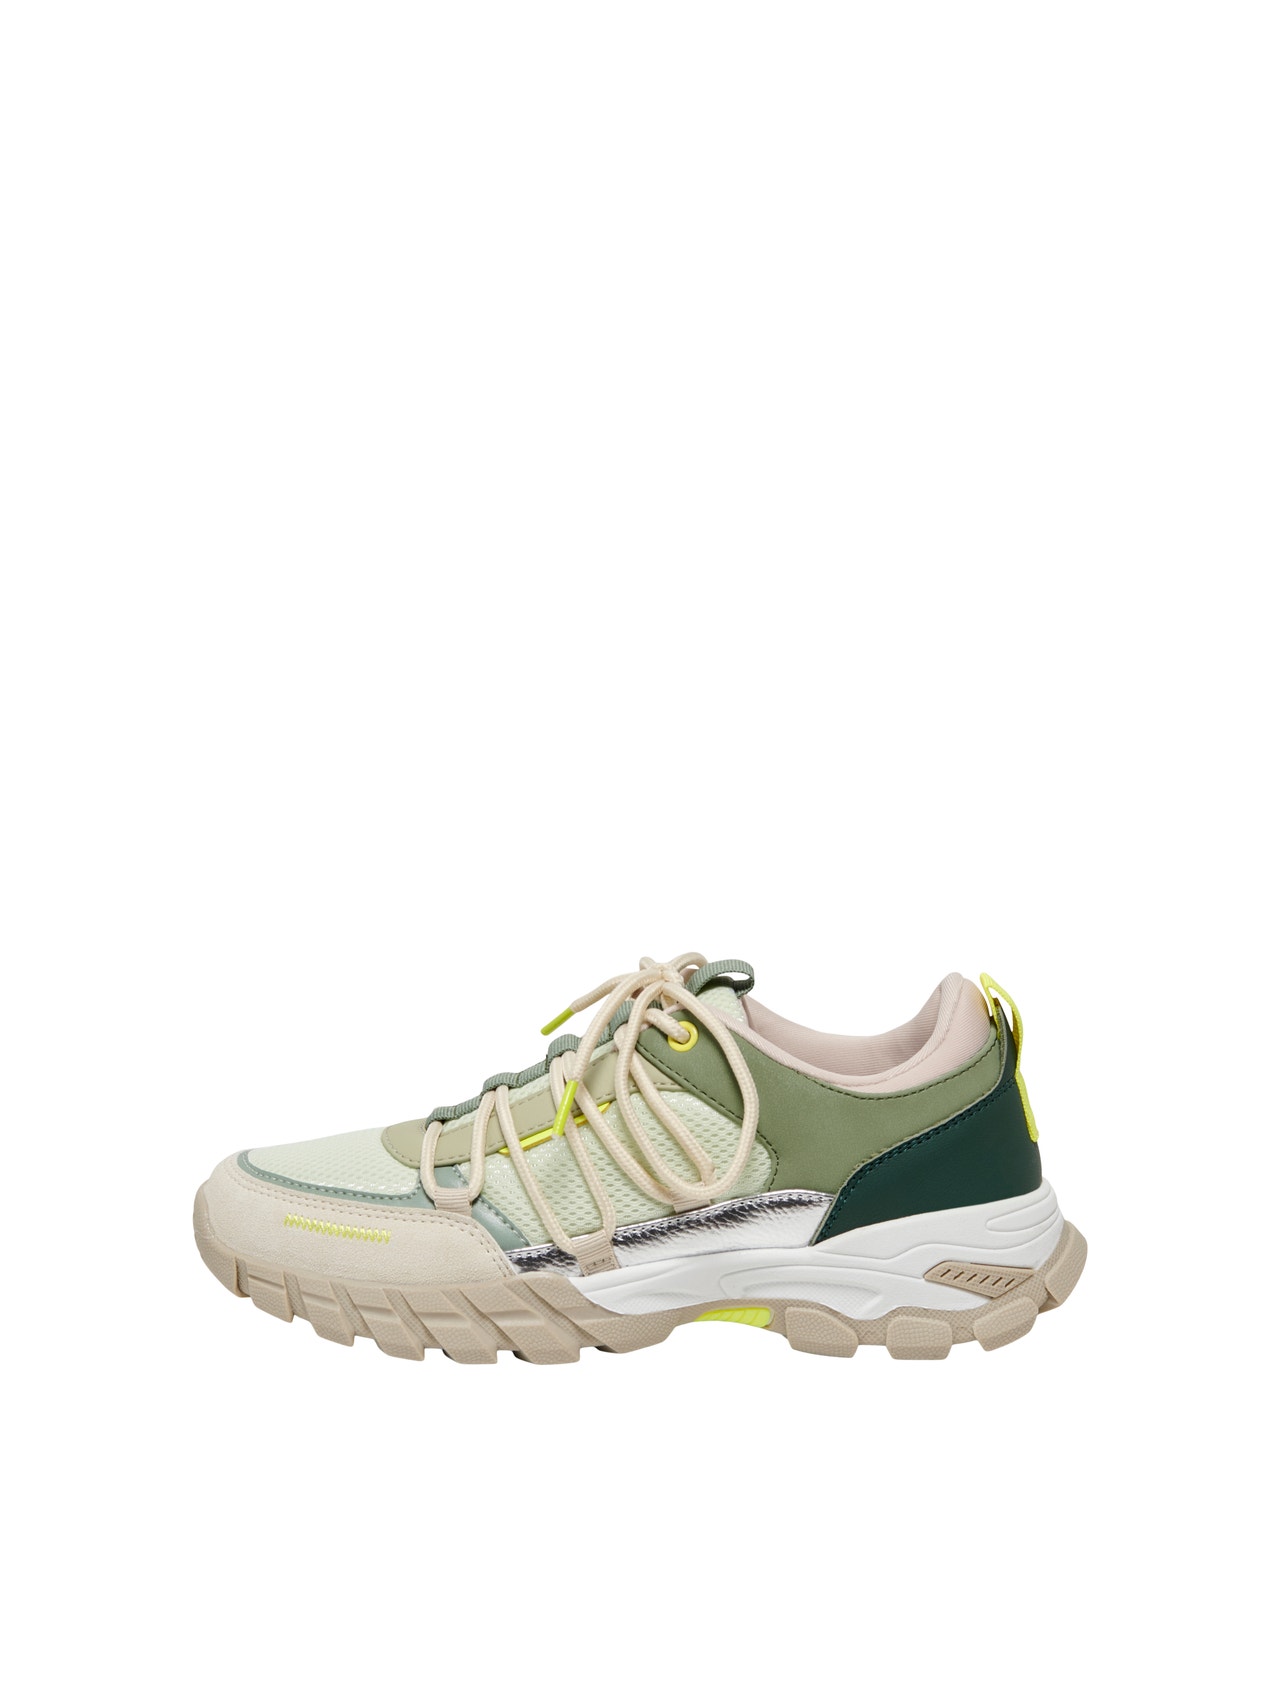 ONLY Round toe Sneaker -Green Ash - 15288073